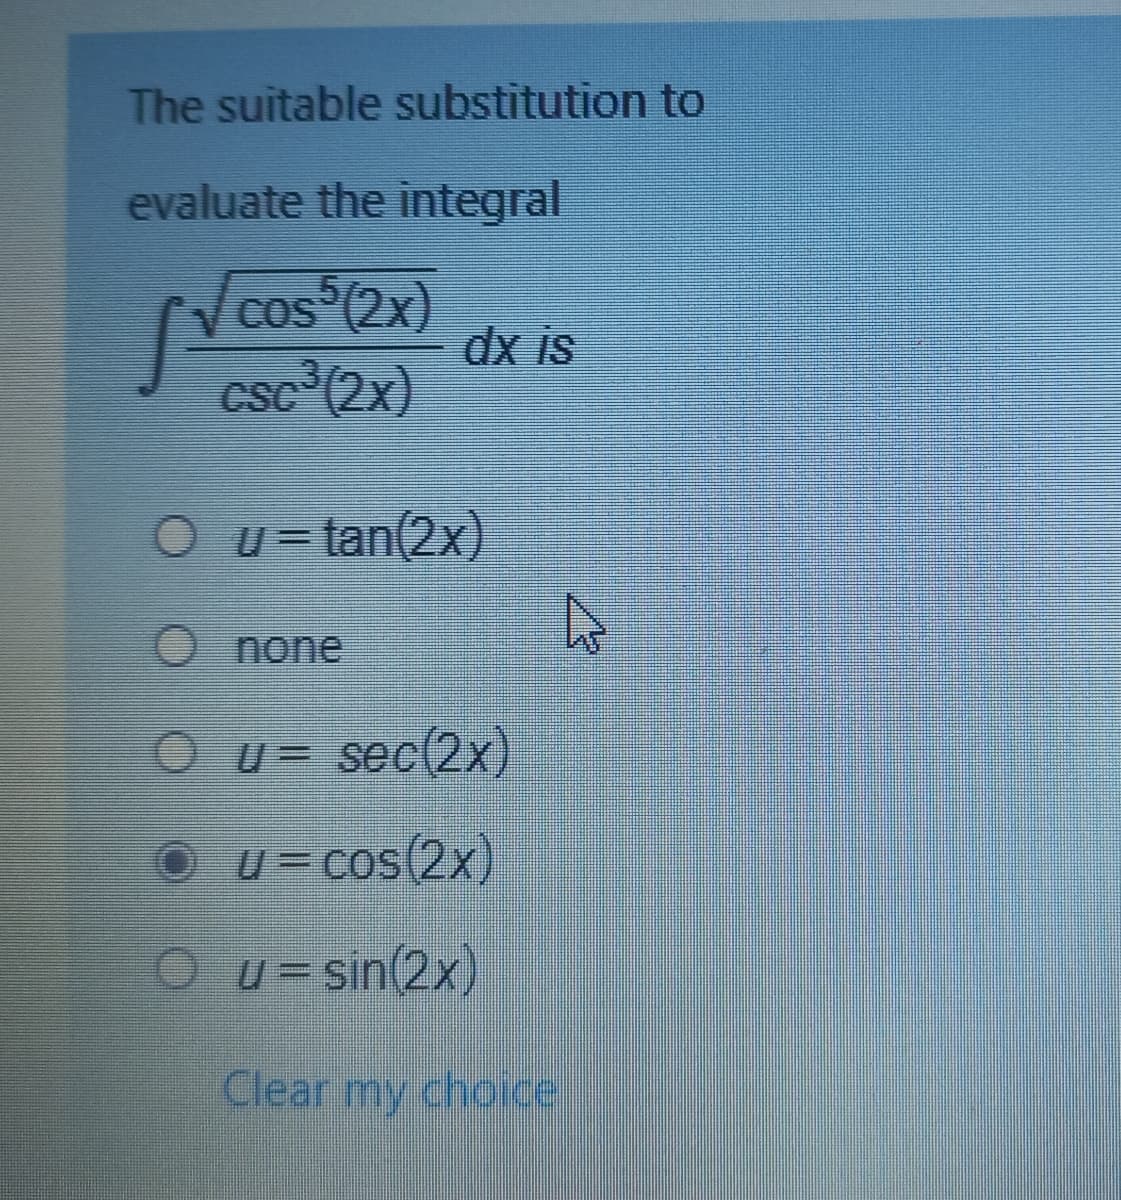 The suitable substitution to
evaluate the integral
cos (2x)
dx is
Csc (2x)
O u= tan(2x)
none
O u= sec(2x)
U= cos(2x)
u = sin(2x)
Clear my choice
